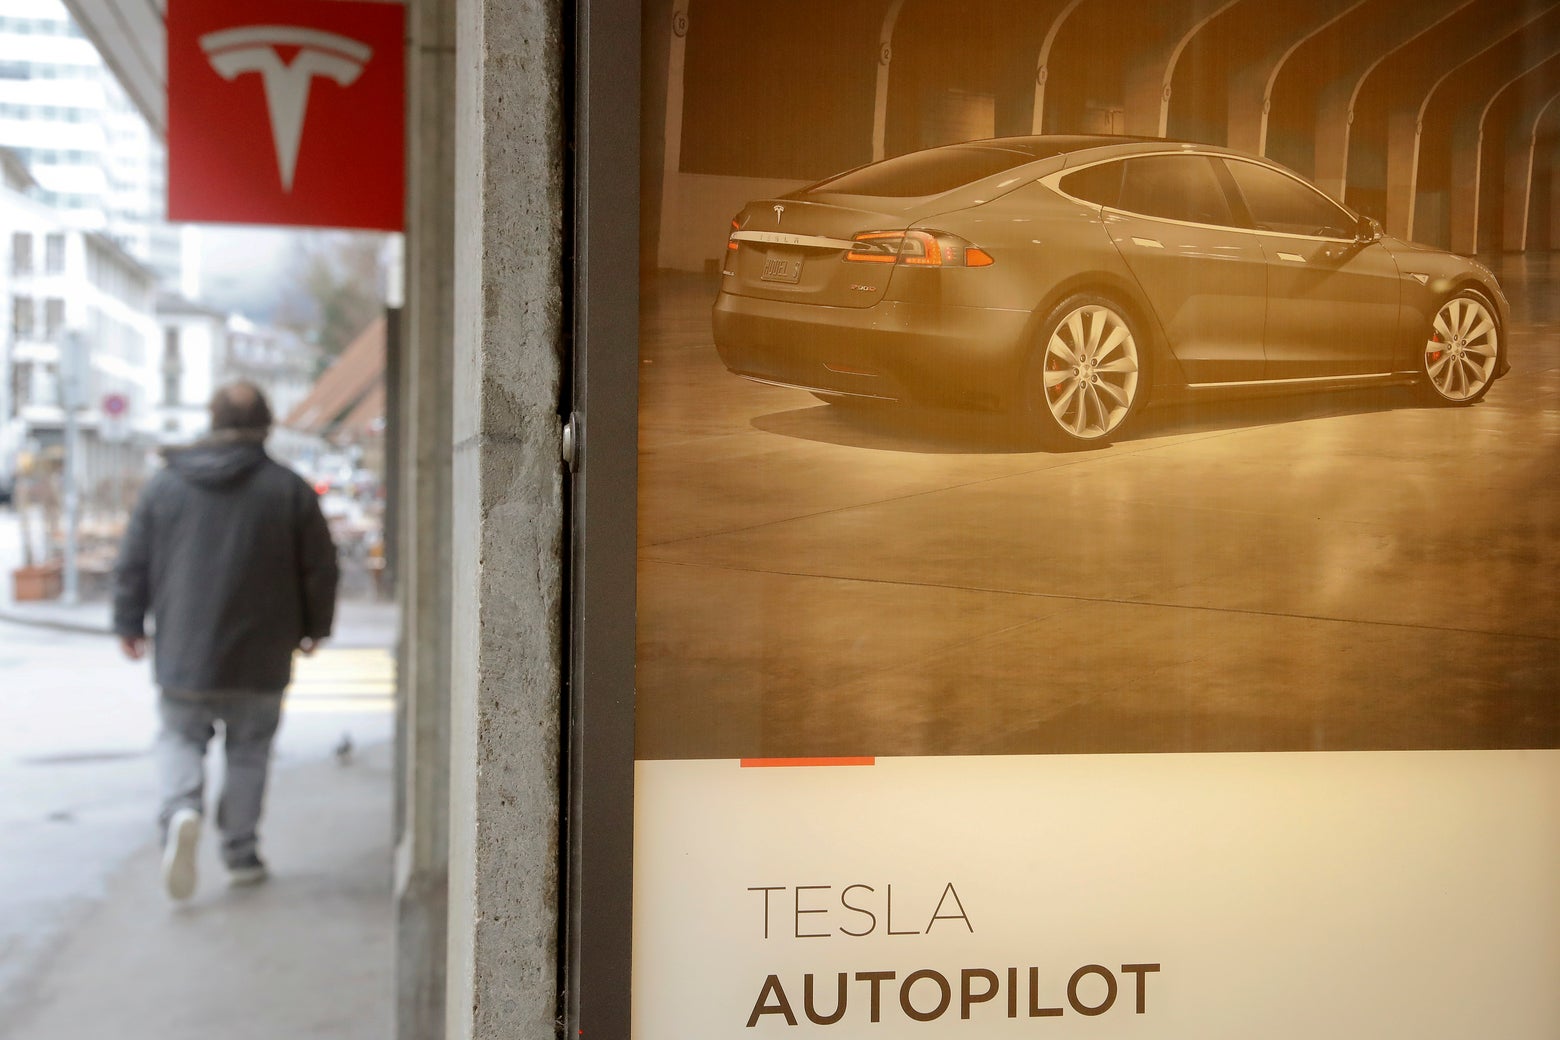 Another Driver Died in a Tesla That Was on Autopilot